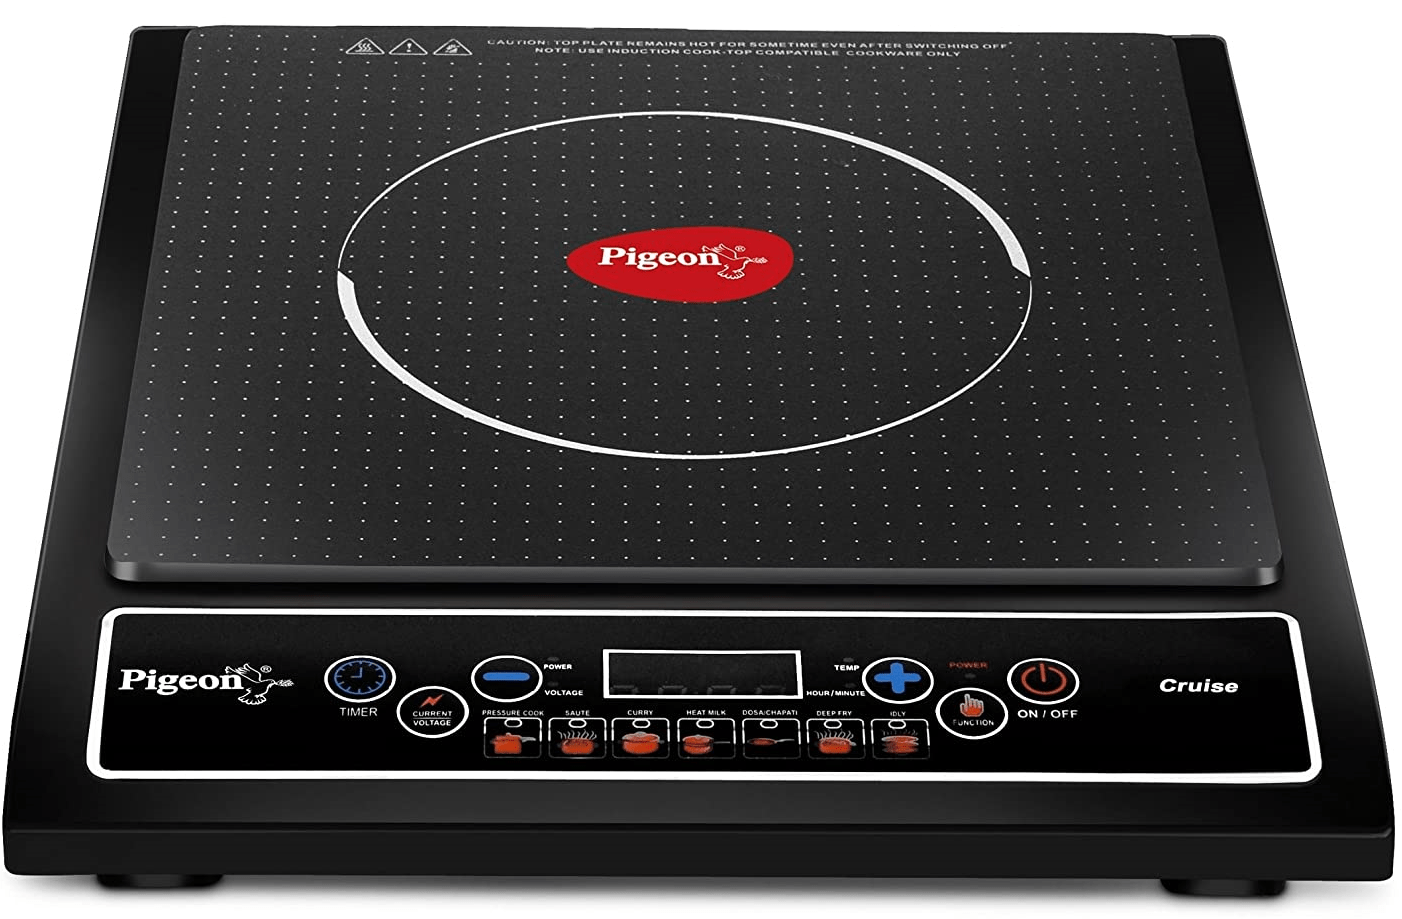 Pigeon by Stovekraft Cruise 1800-Watt Induction Cooktop (Black) & Favourite Outer Lid Non Induction Aluminium Pressure Cooker, 3 Litres, Silver Combo